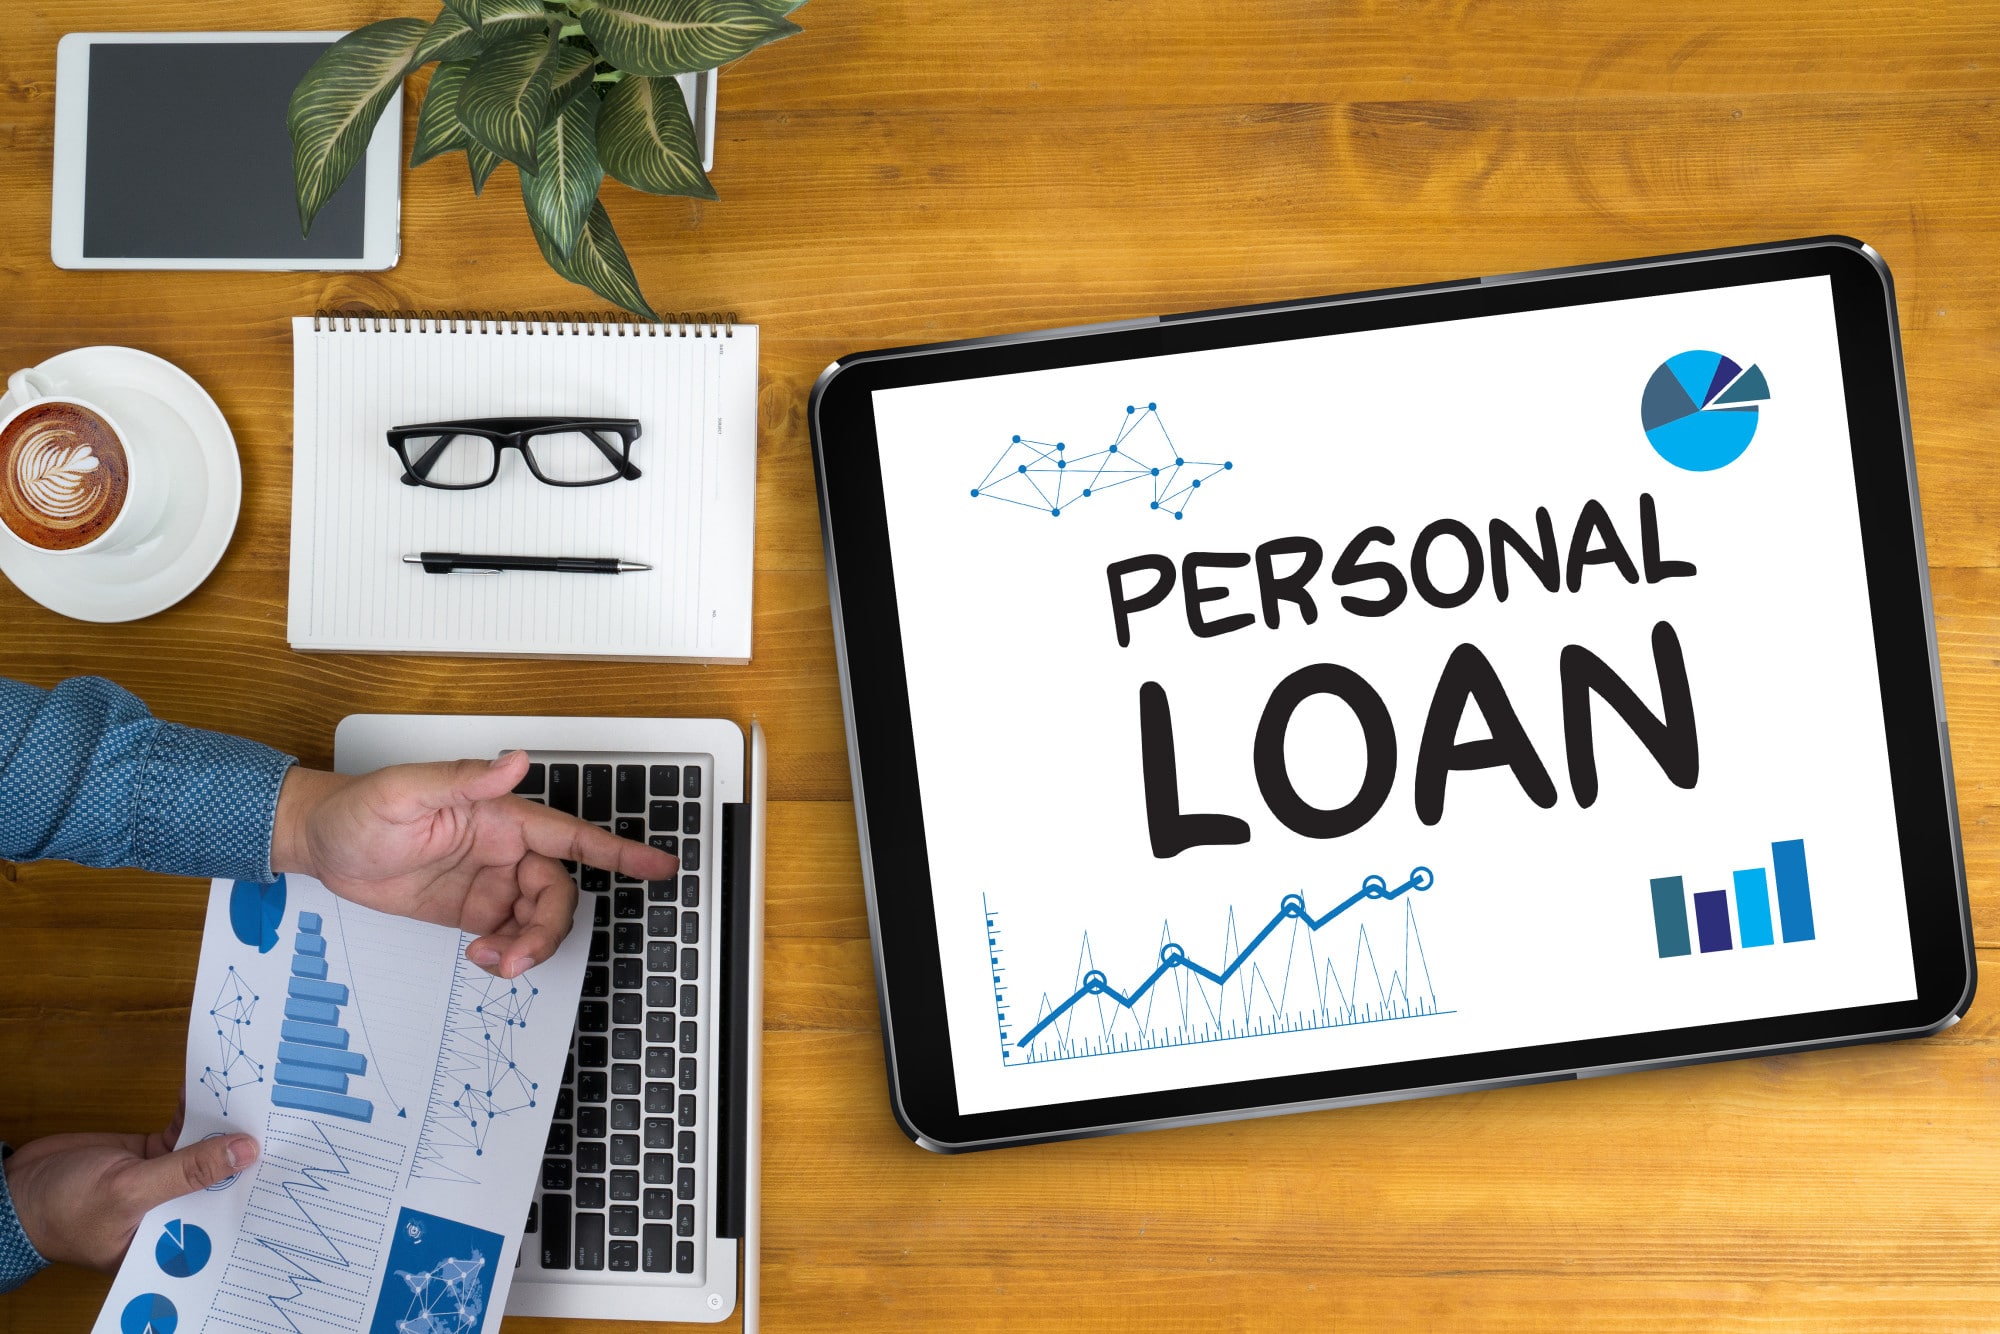 Online Personal Loans 2020: Good or Bad Idea? [Review]